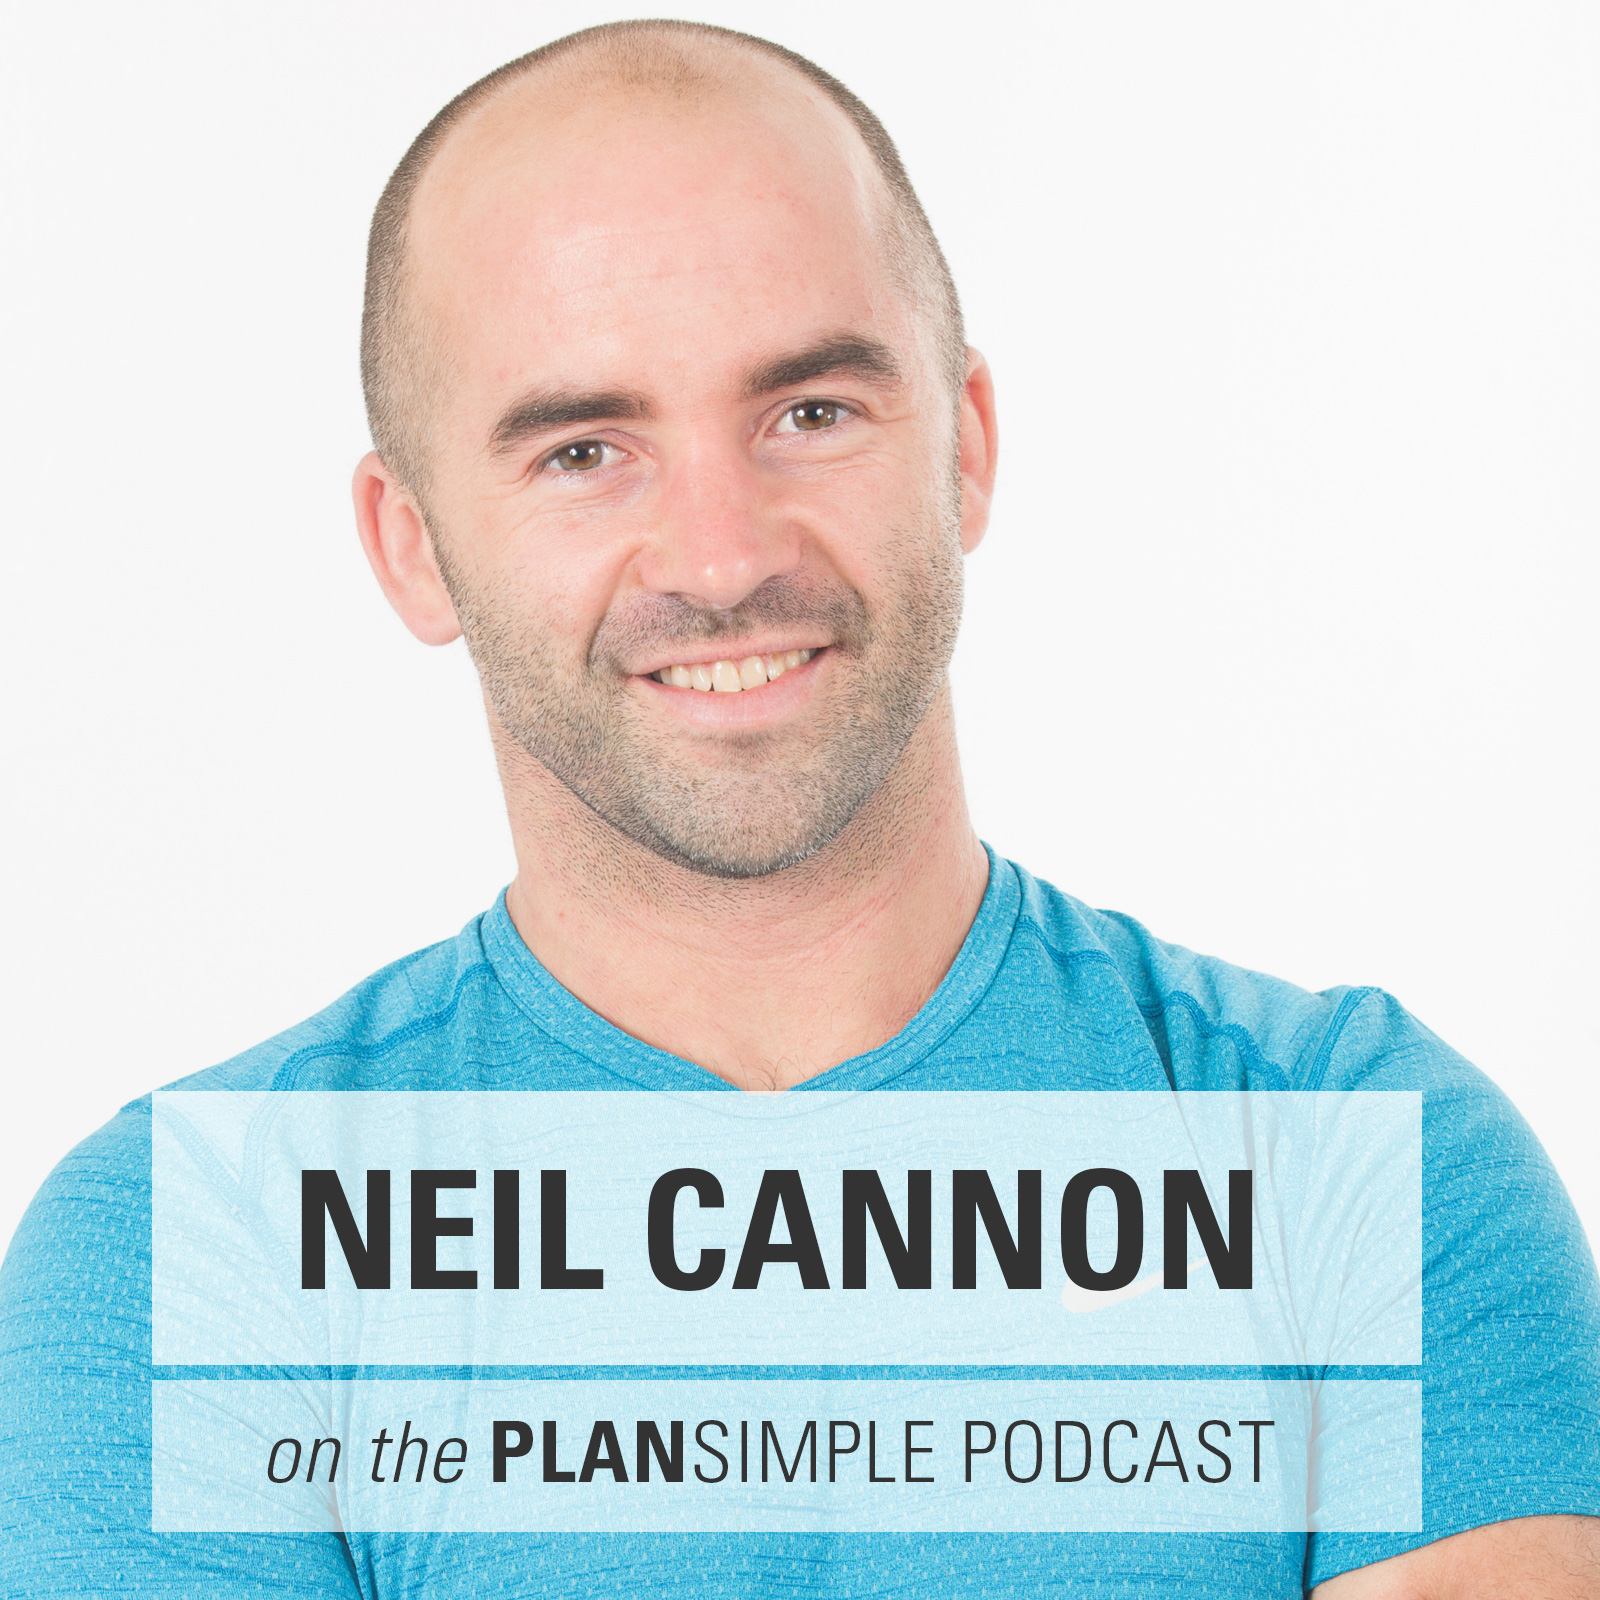 No More Inflammation with Neil Cannon